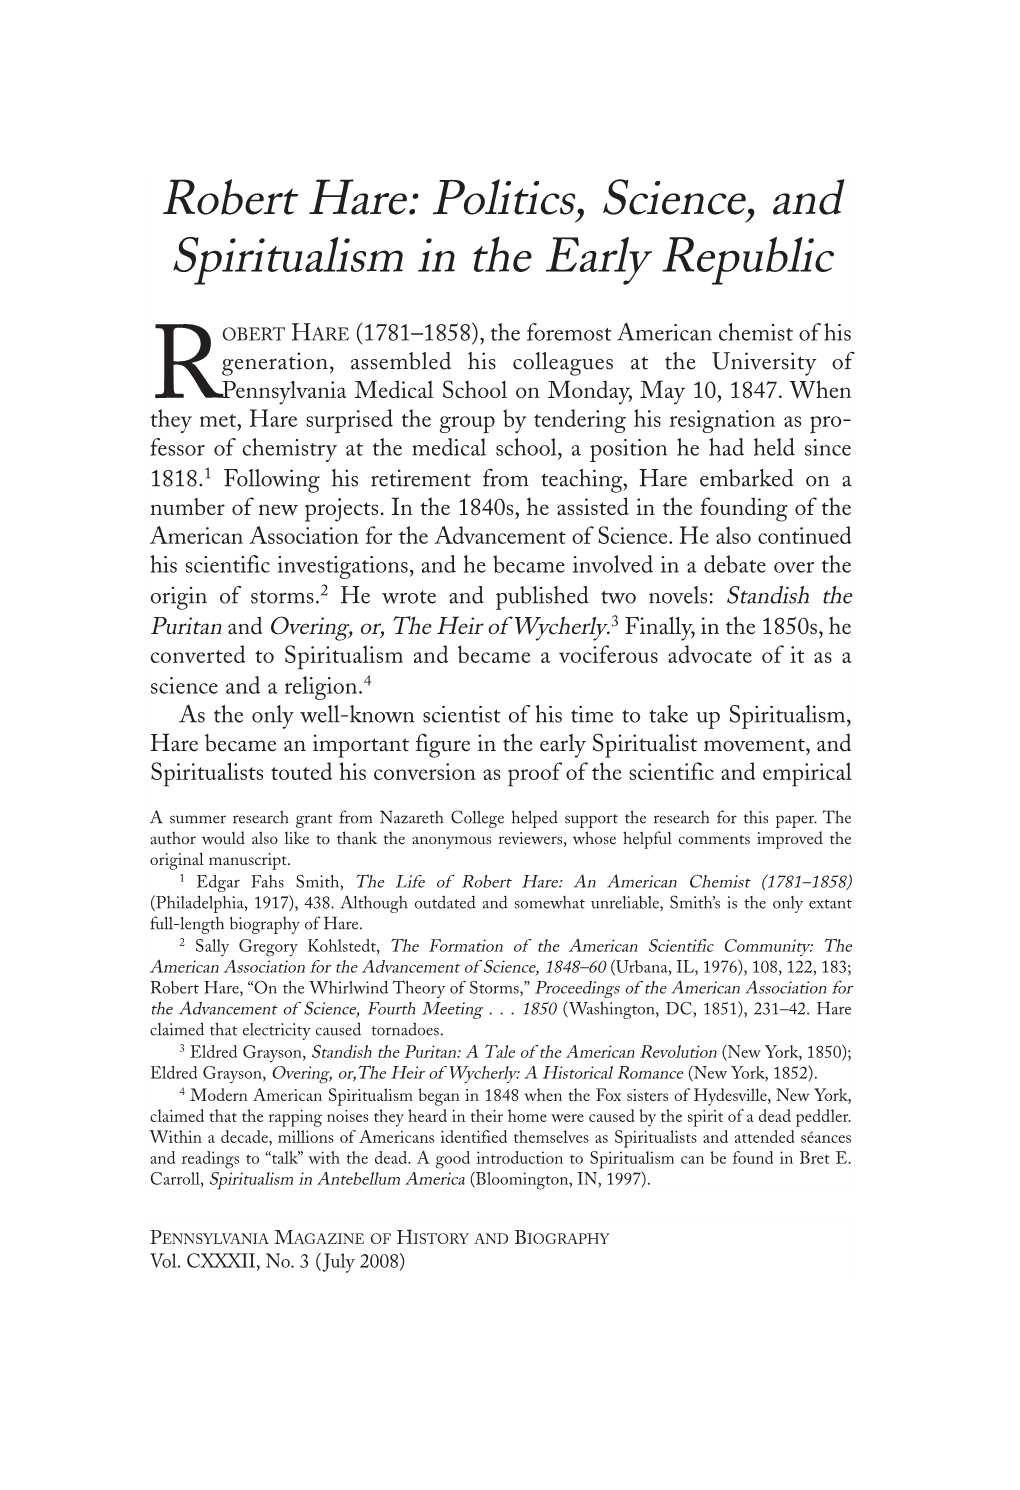 Robert Hare: Politics, Science, and Spiritualism in the Early Republic